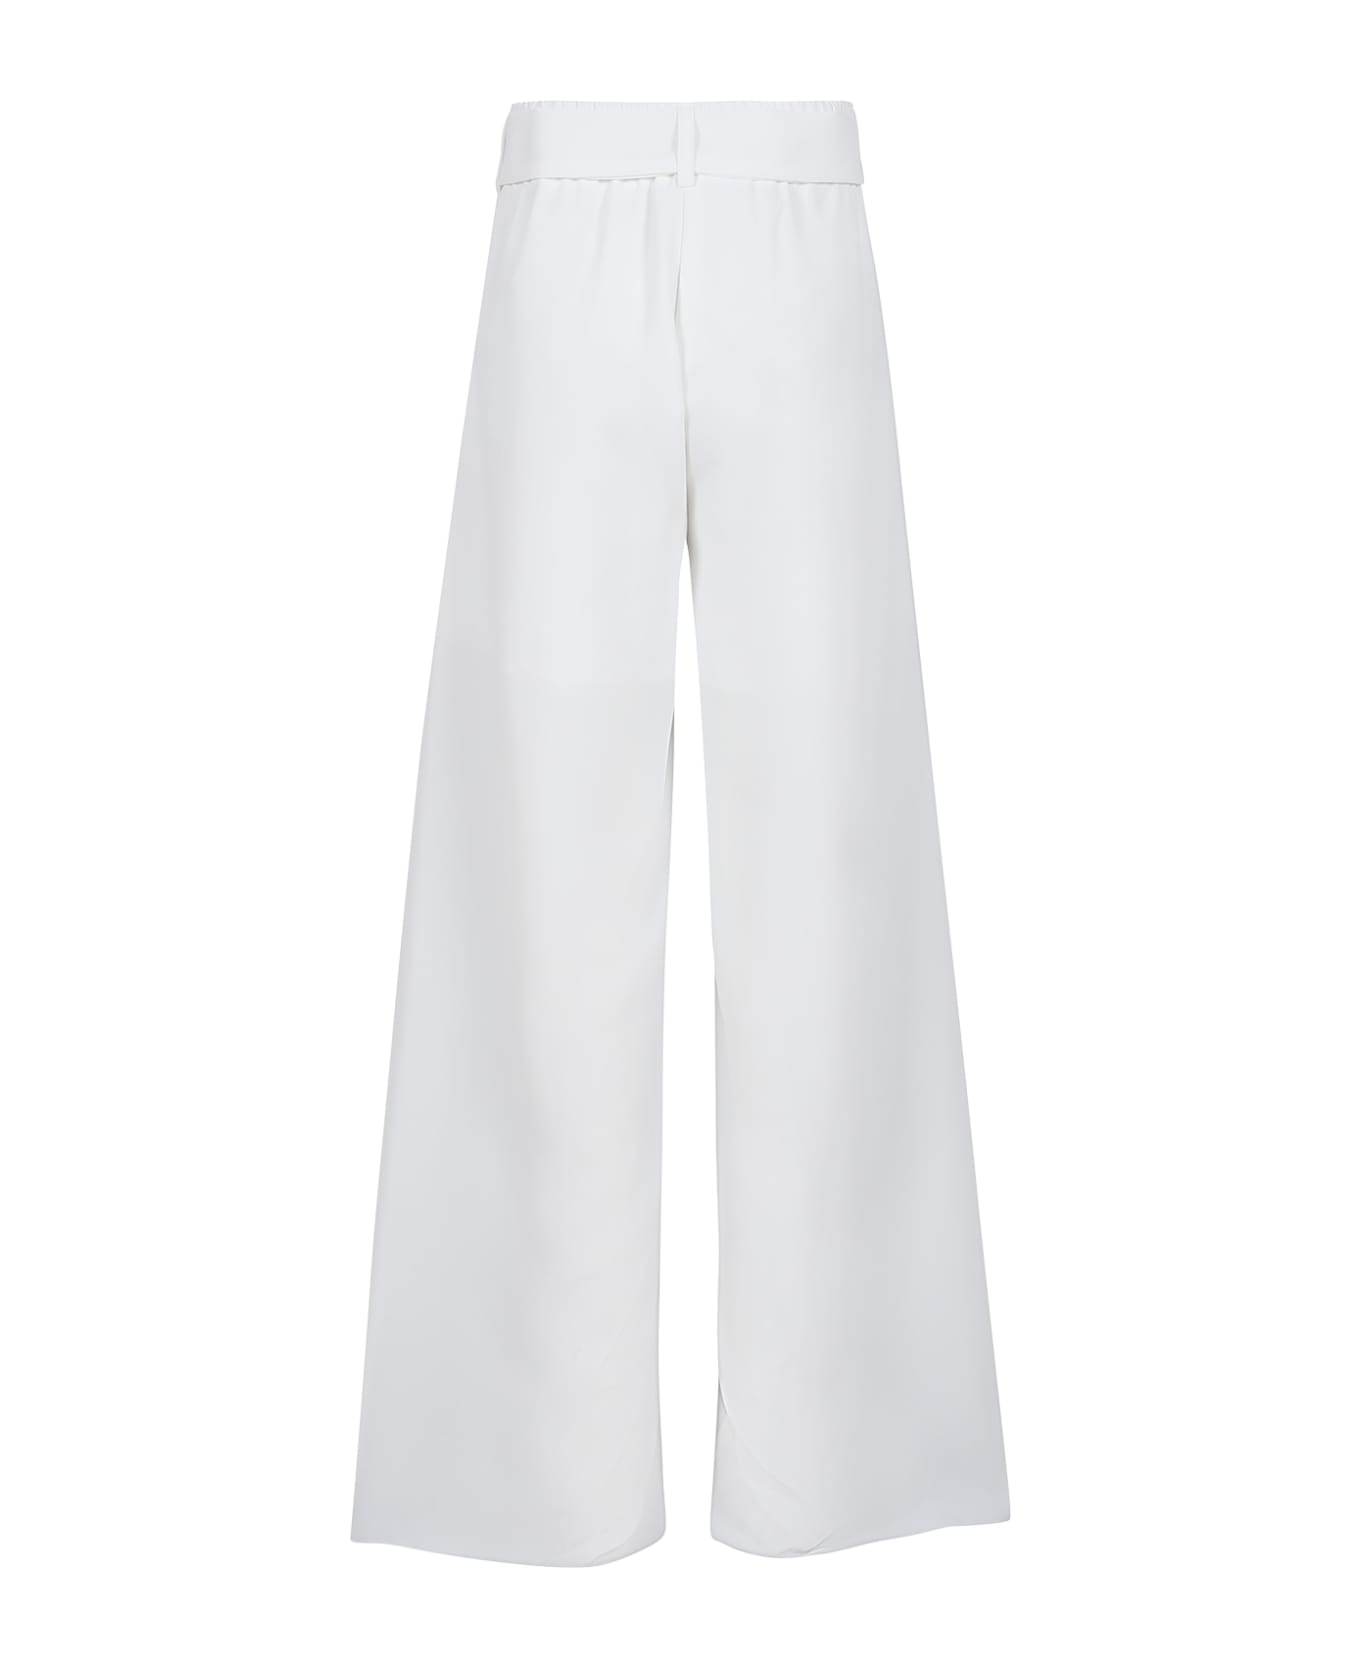 Monnalisa White Trousers For Girl With Bow Belt - Panna